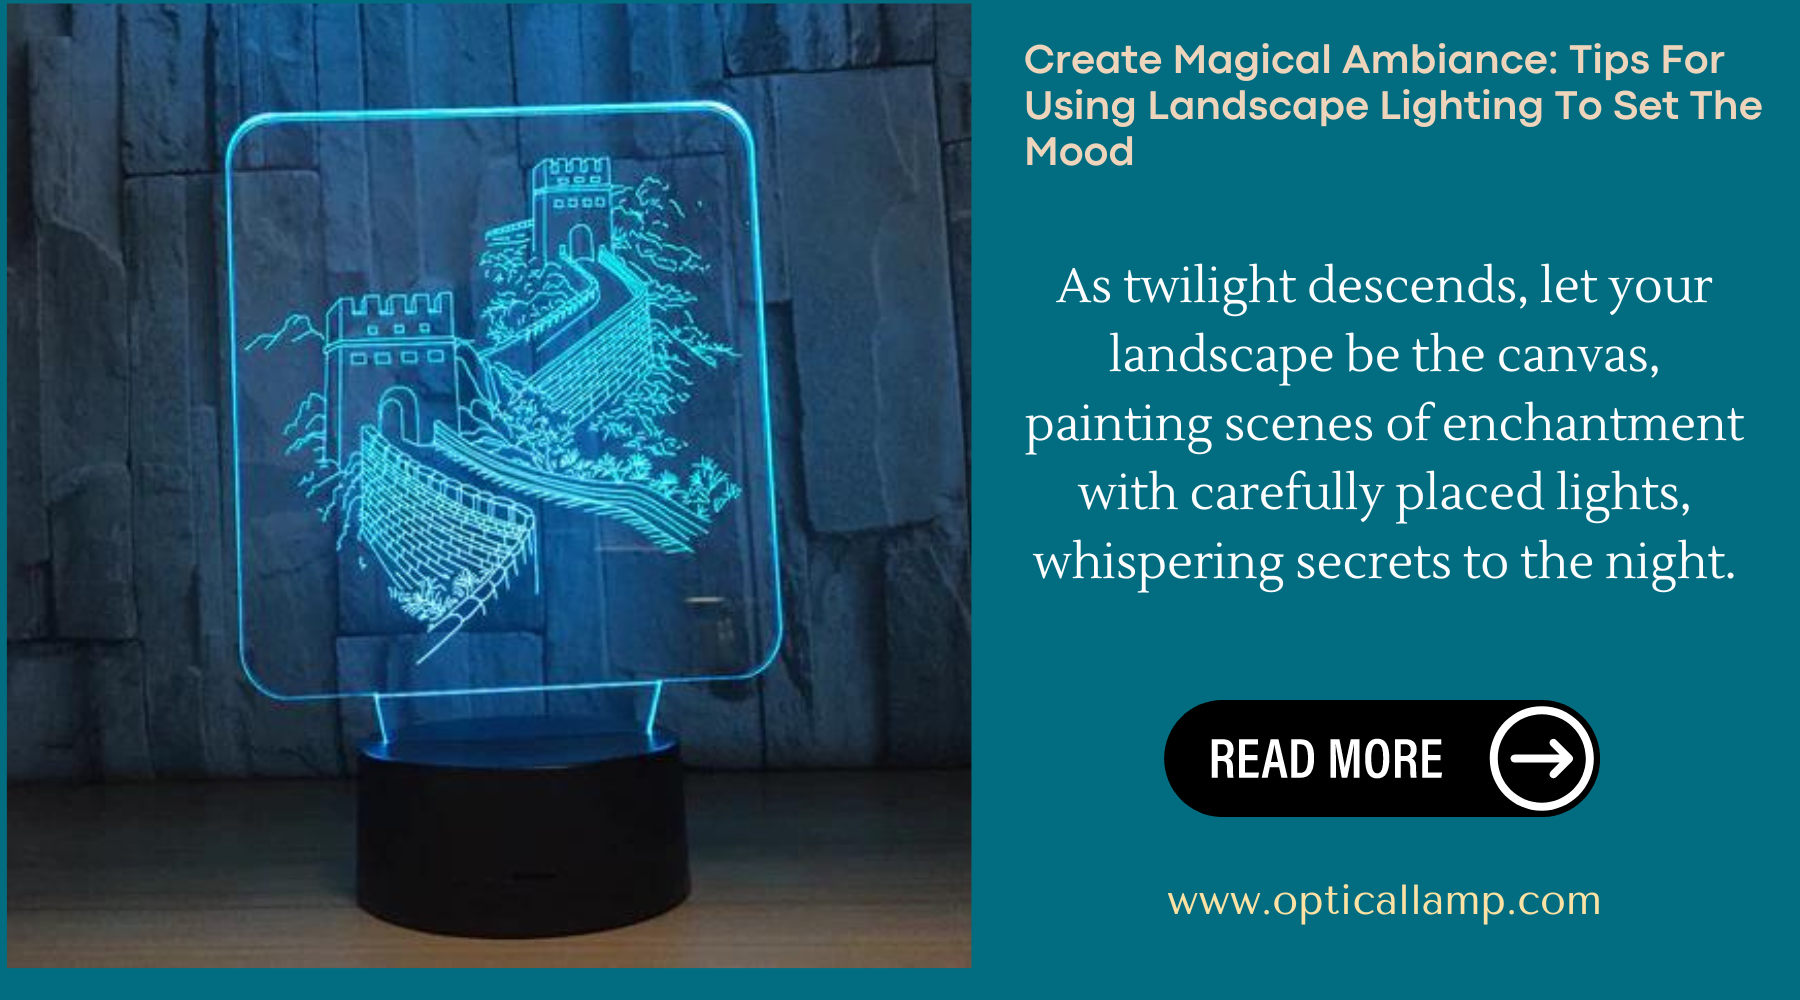 Create Magical Ambiance: Tips For Using Landscape Lighting To Set The Mood